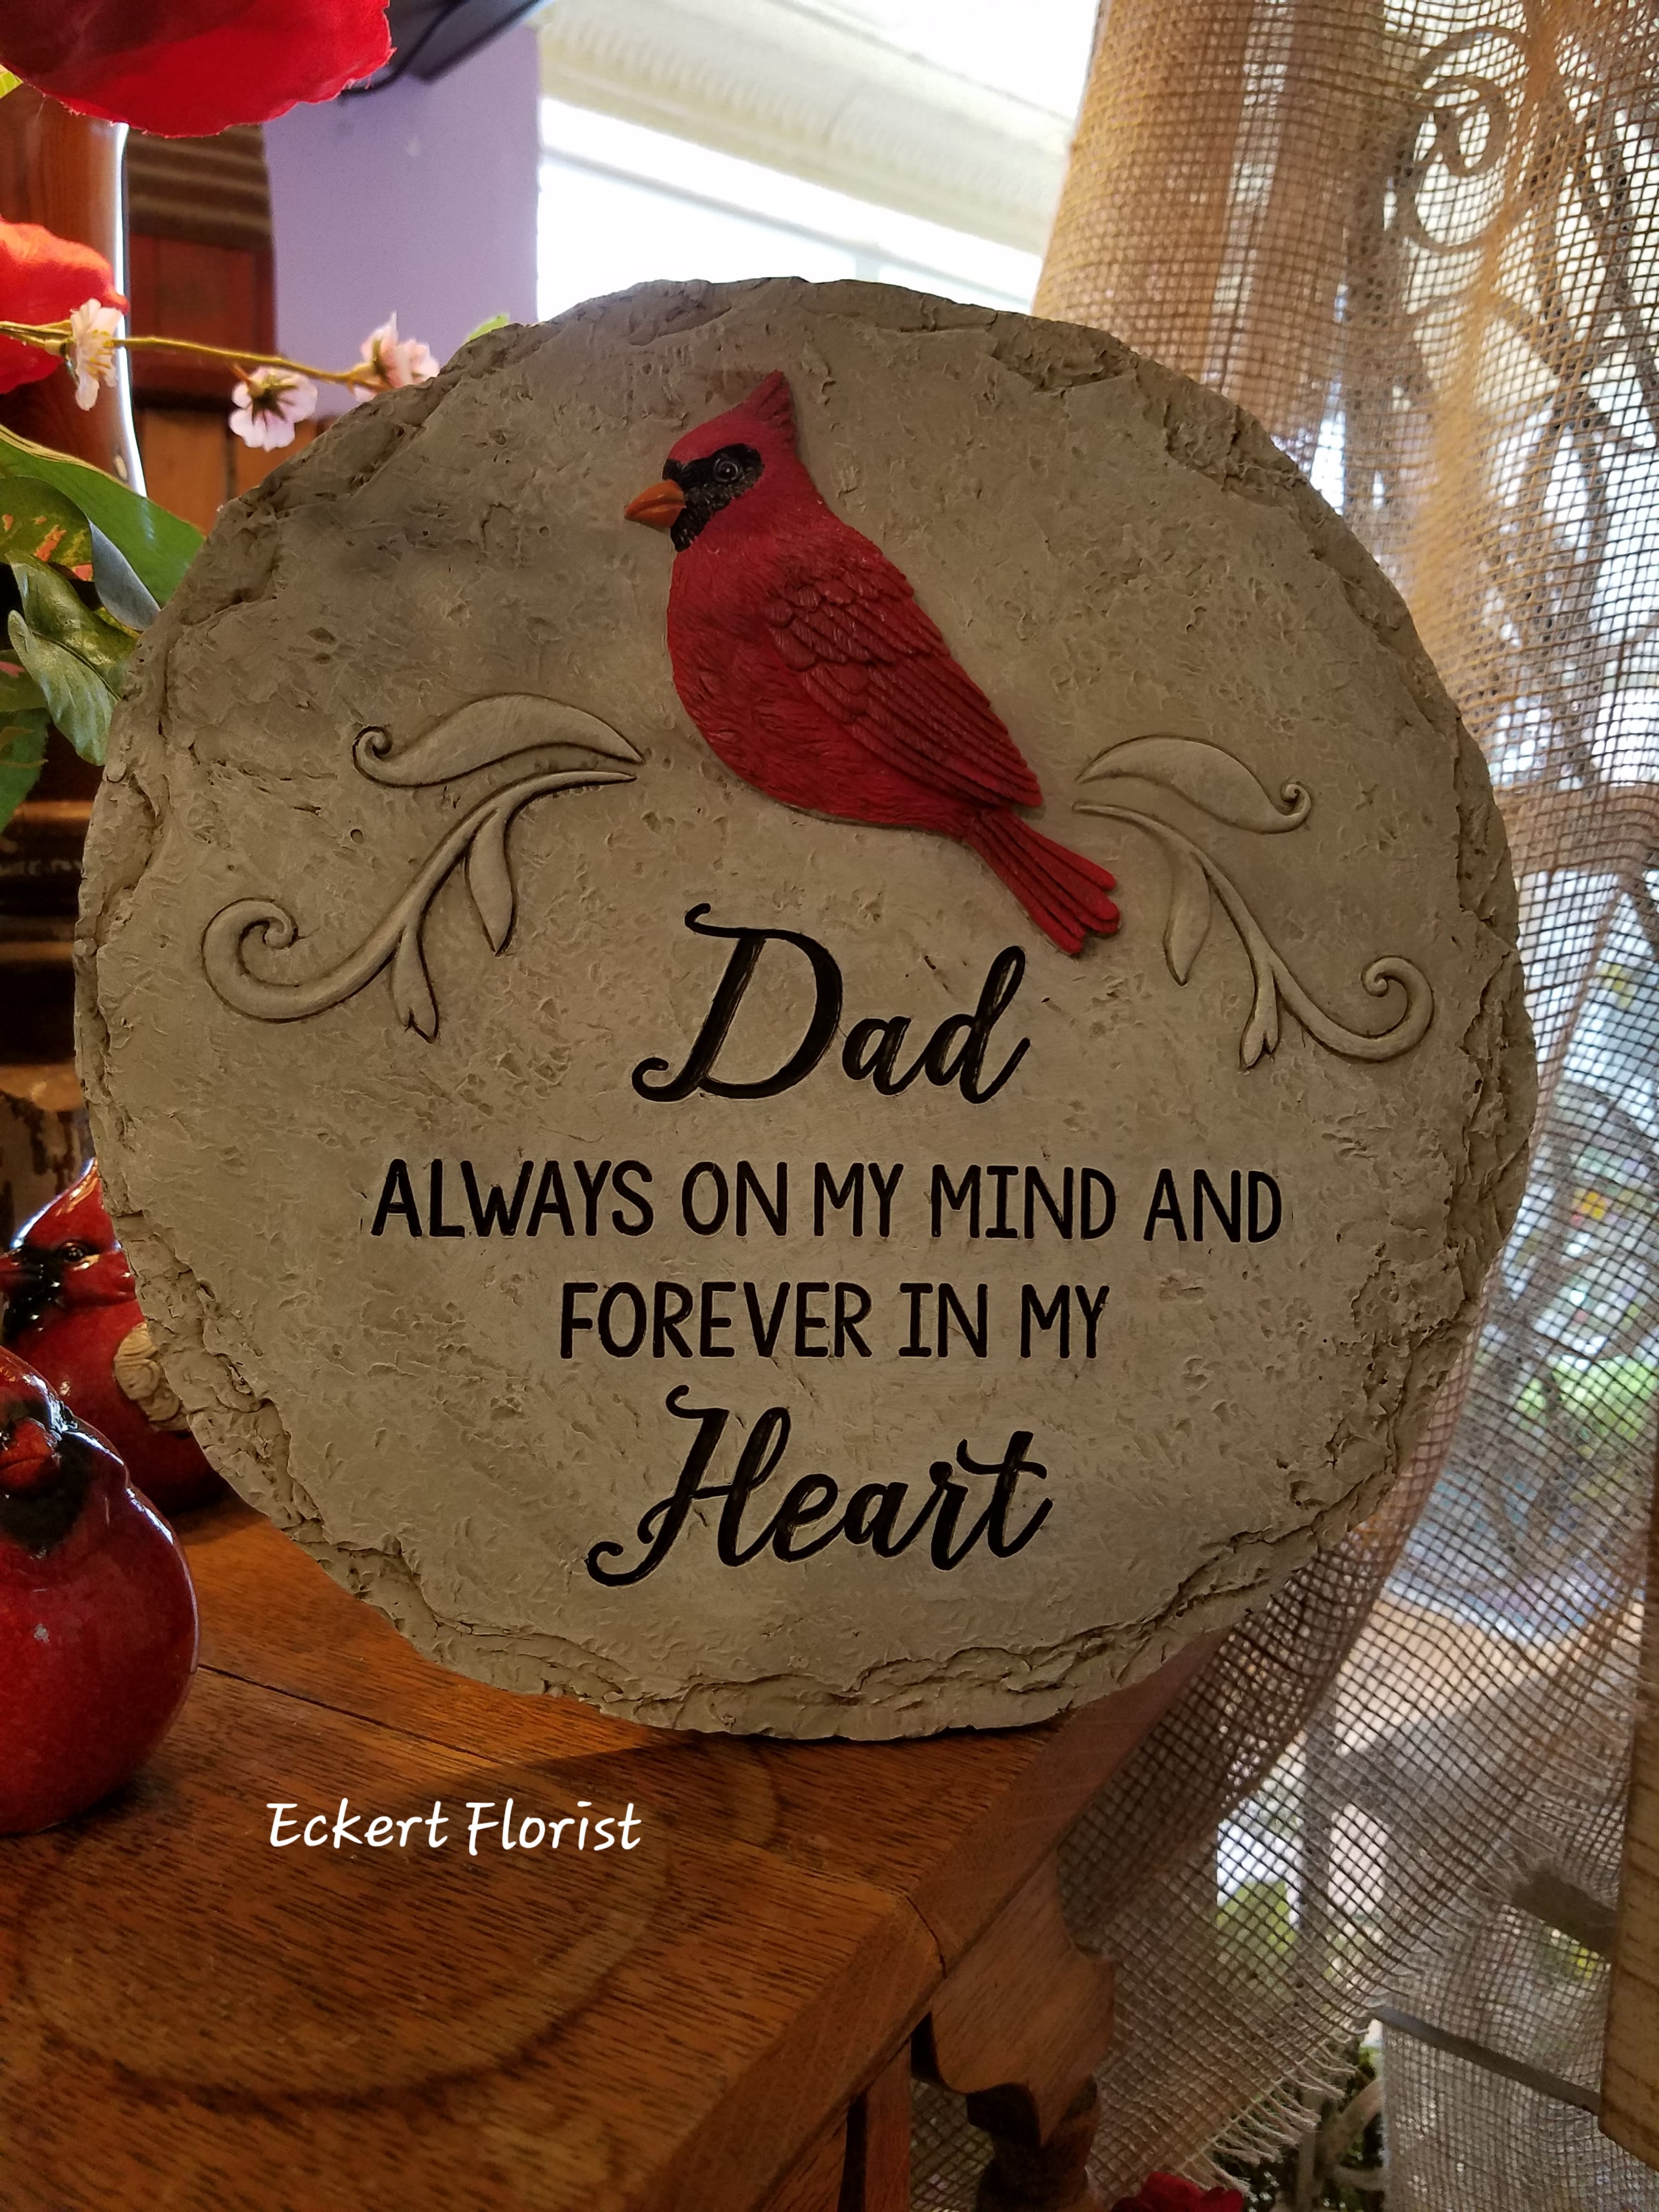 Eckert Florist's &quot;Dad...Forever in My Heart&quot; Round Memorial Stone *LOCAL DELIVERY ONLY - Resin round stone measures approx. 11&quot; Diameter This nice memorial keepsake may be sent to a funeral/memorial service or home. Can be added to a green plant or fresh arrangement. See Deluxe or Premium upgrades. *See Add-on Section for Display Easel **LOCAL DELIVERY ONLY*